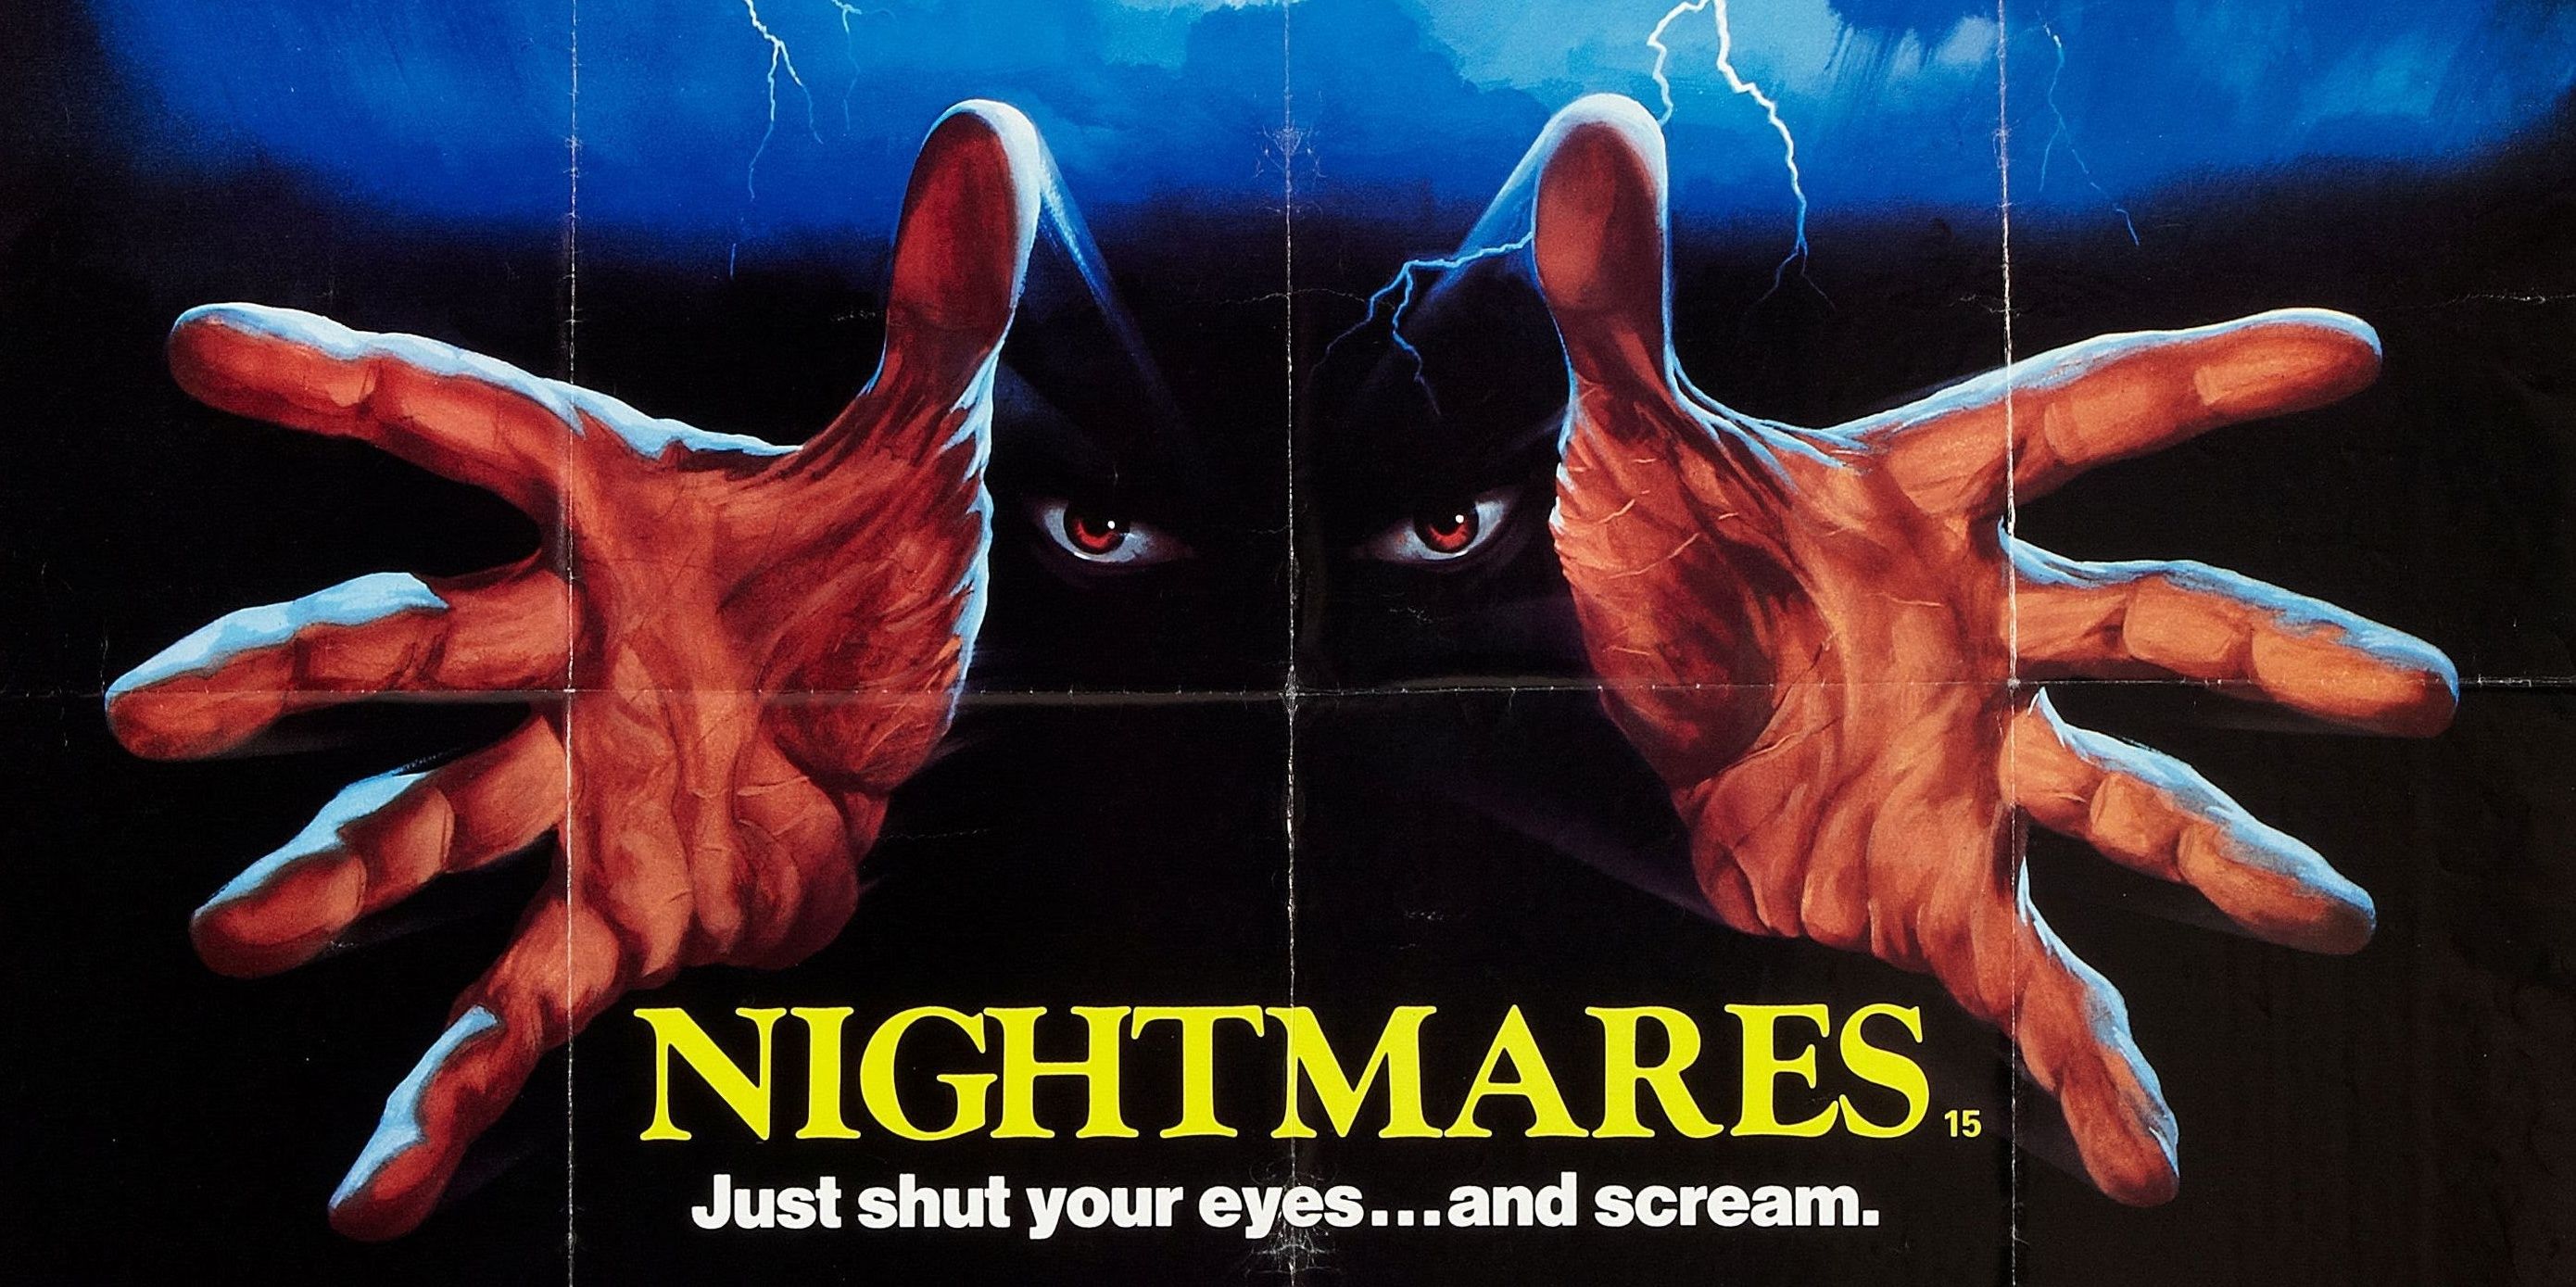 The poster for film Nightmares (1983) Cropped